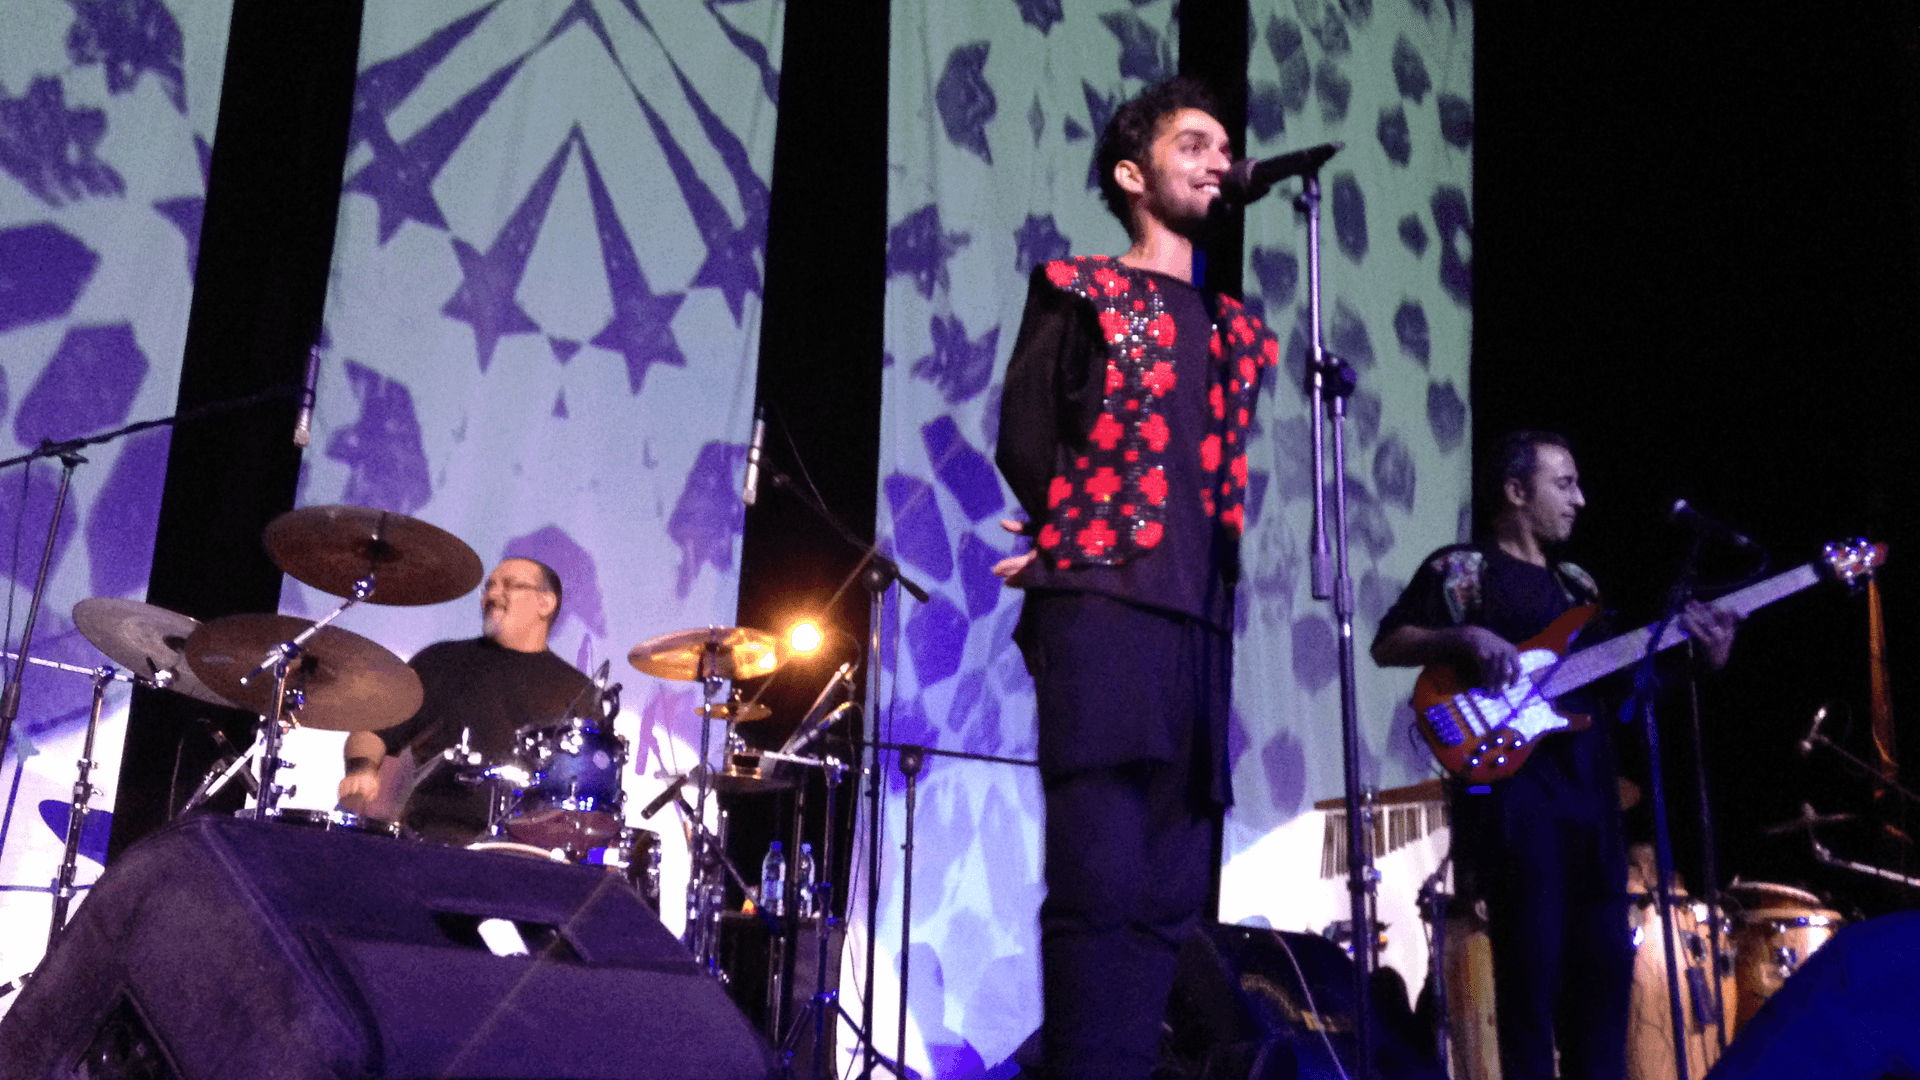 Iranian folk-rock band Damahi performs in the country with approval from the government.